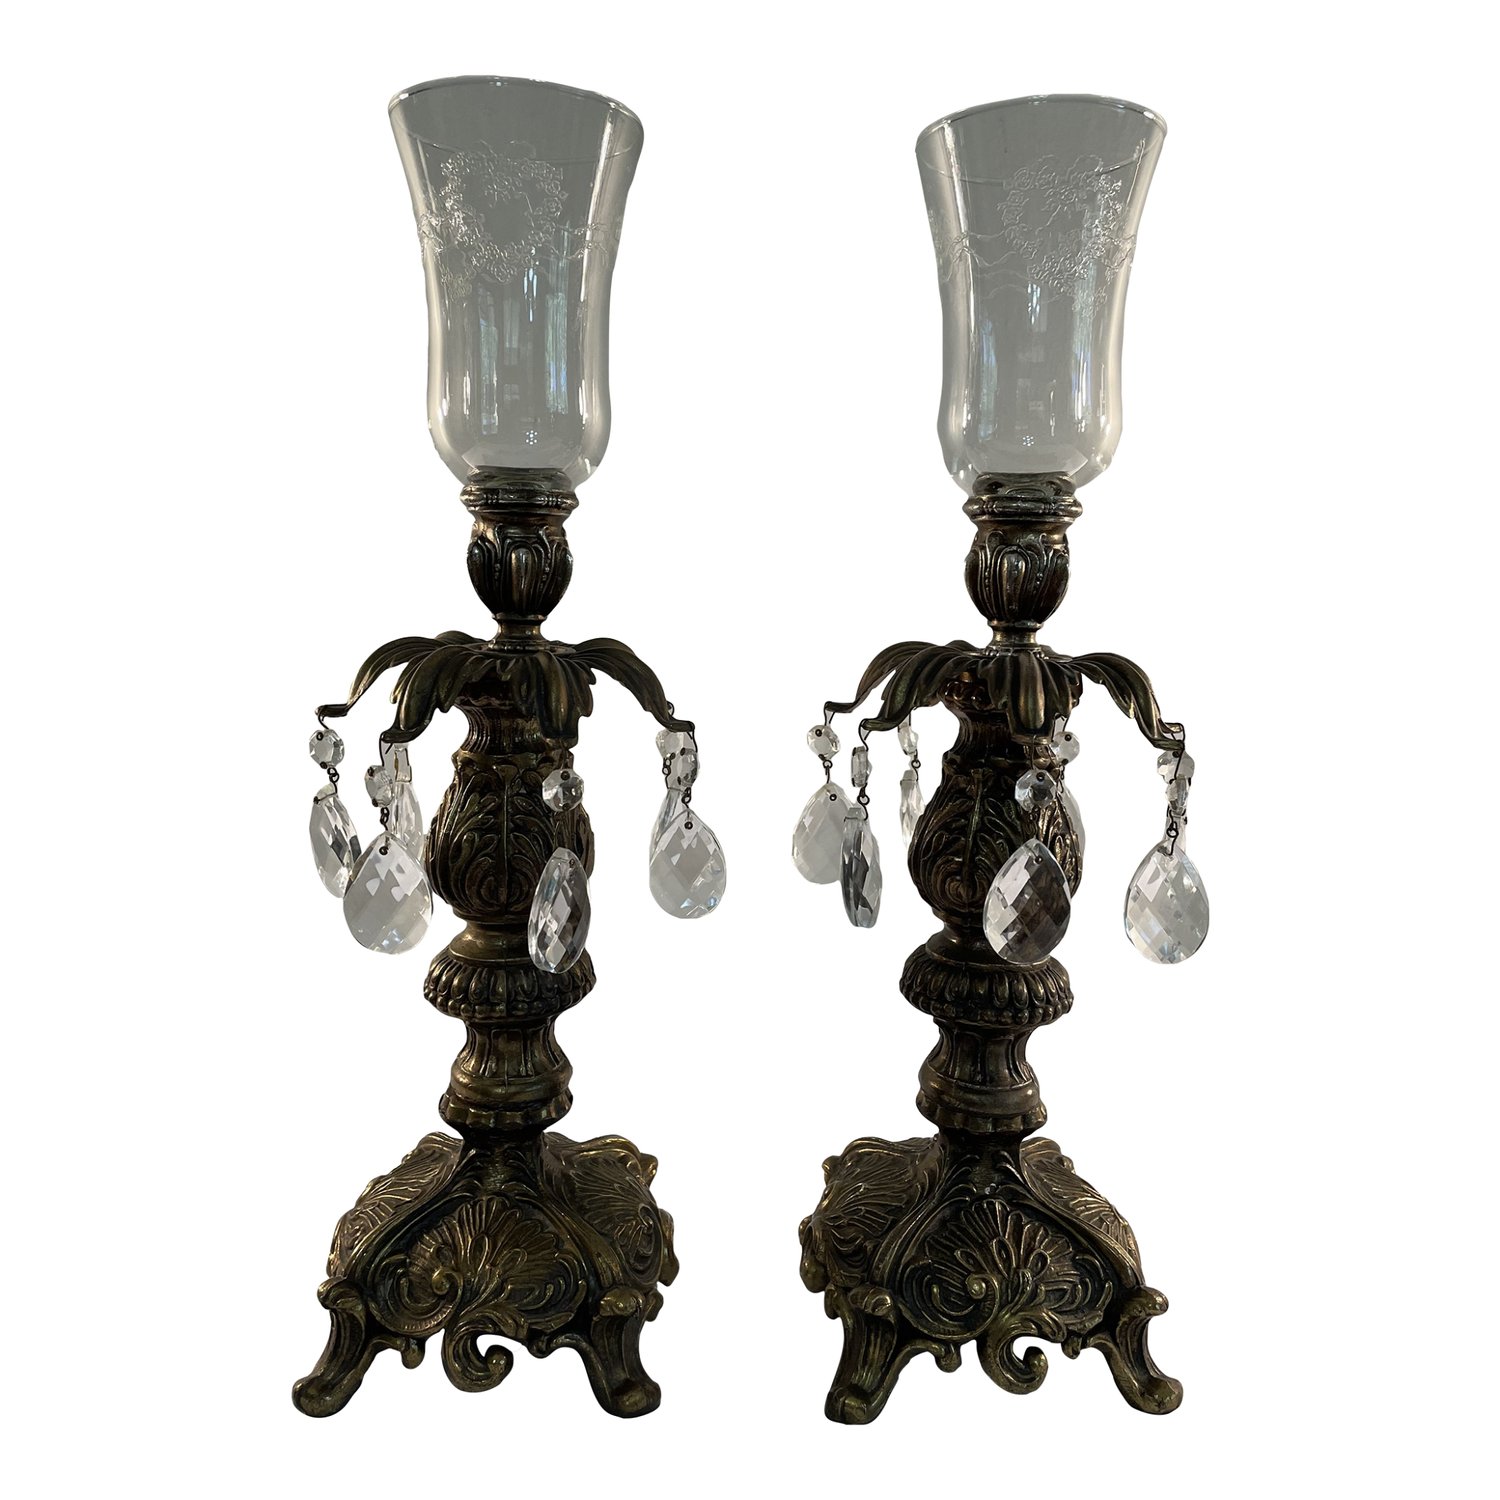 French Baroque Style Brass Candle Holders With Votives - a Pair